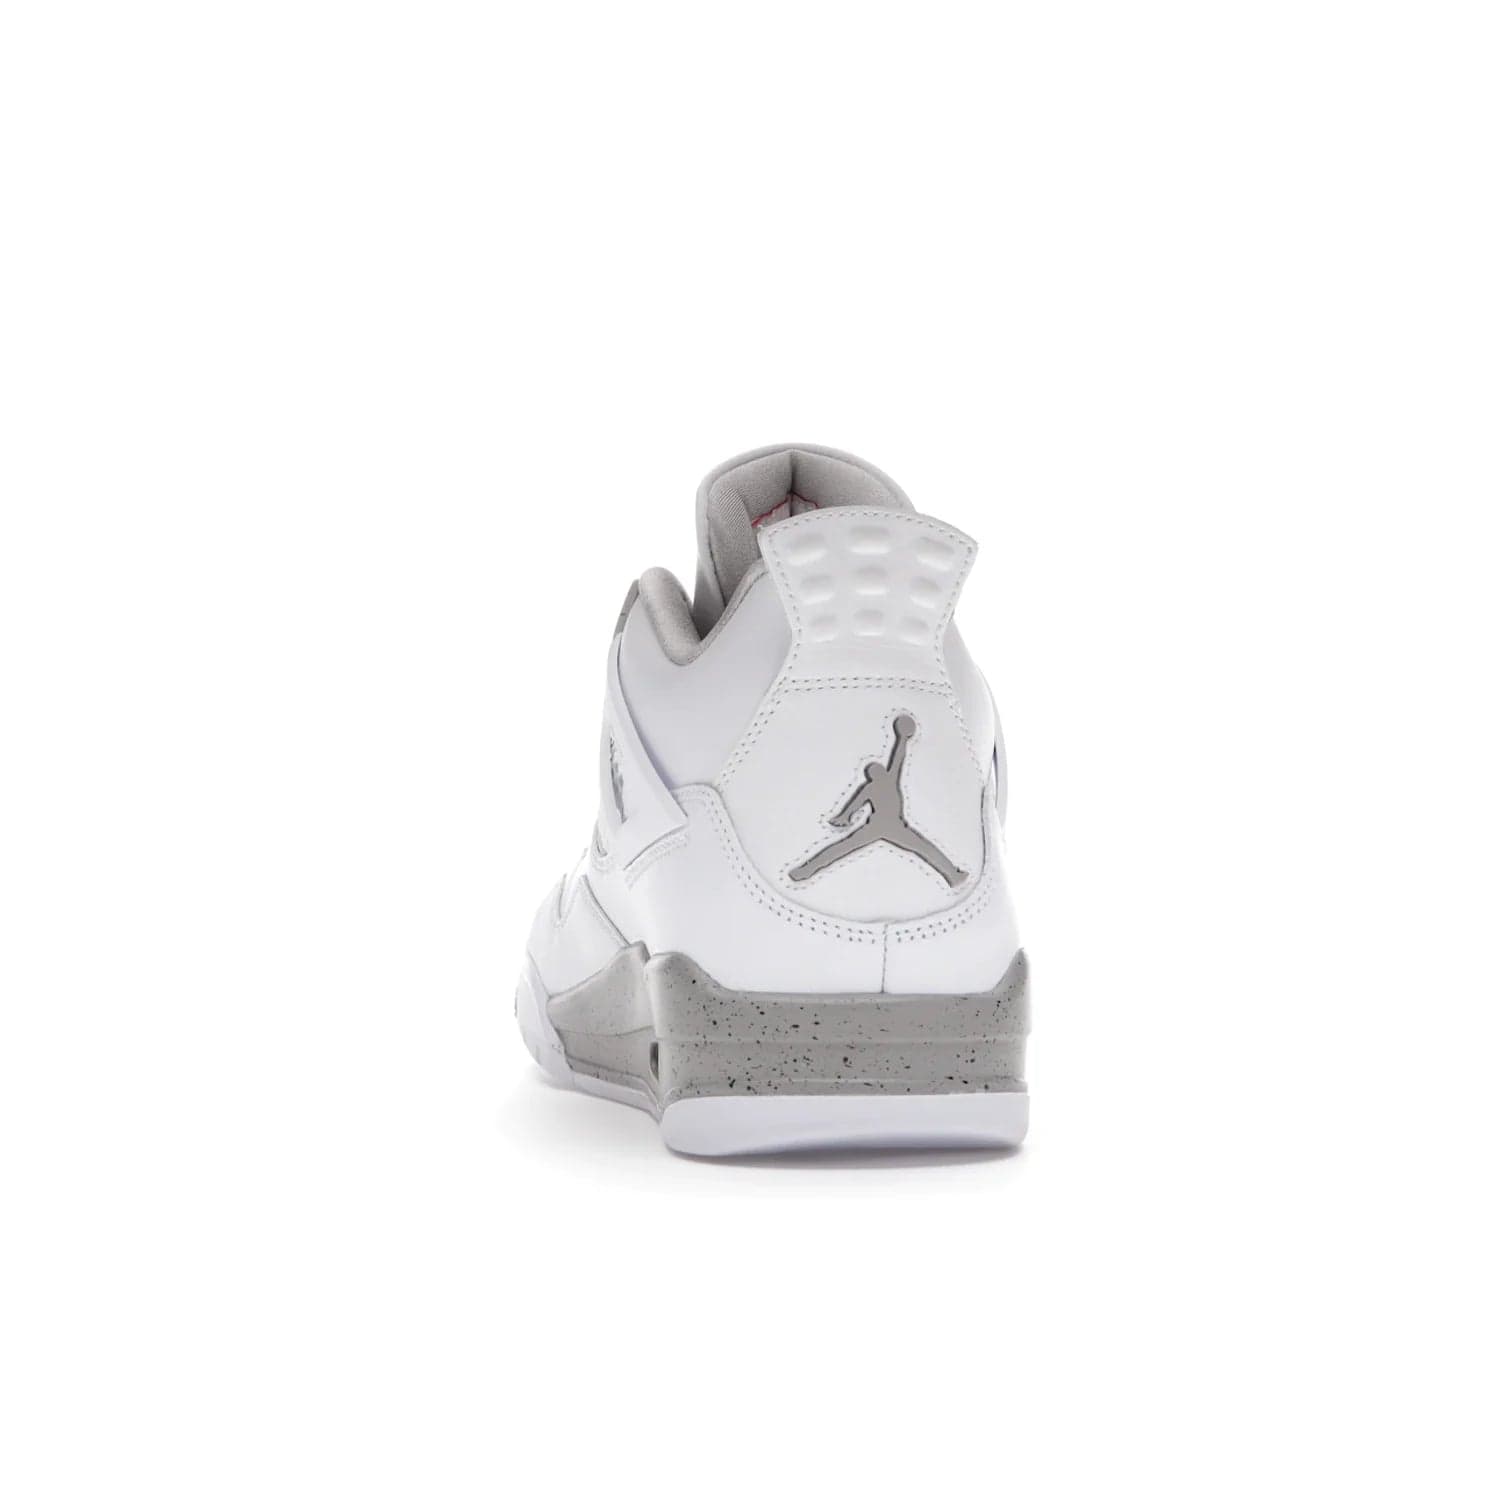 Jordan 4 Retro White Oreo (2021) - Image 27 - Only at www.BallersClubKickz.com - Update your sneaker style with the Air Jordan 4 Retro White Oreo. Limited-edition sneaker features white leather and mesh upper, Tech Grey eyelets and midsole, Jumpman logo embroidered on the tongue, and more. Released exclusively on Saturday, July 3rd.